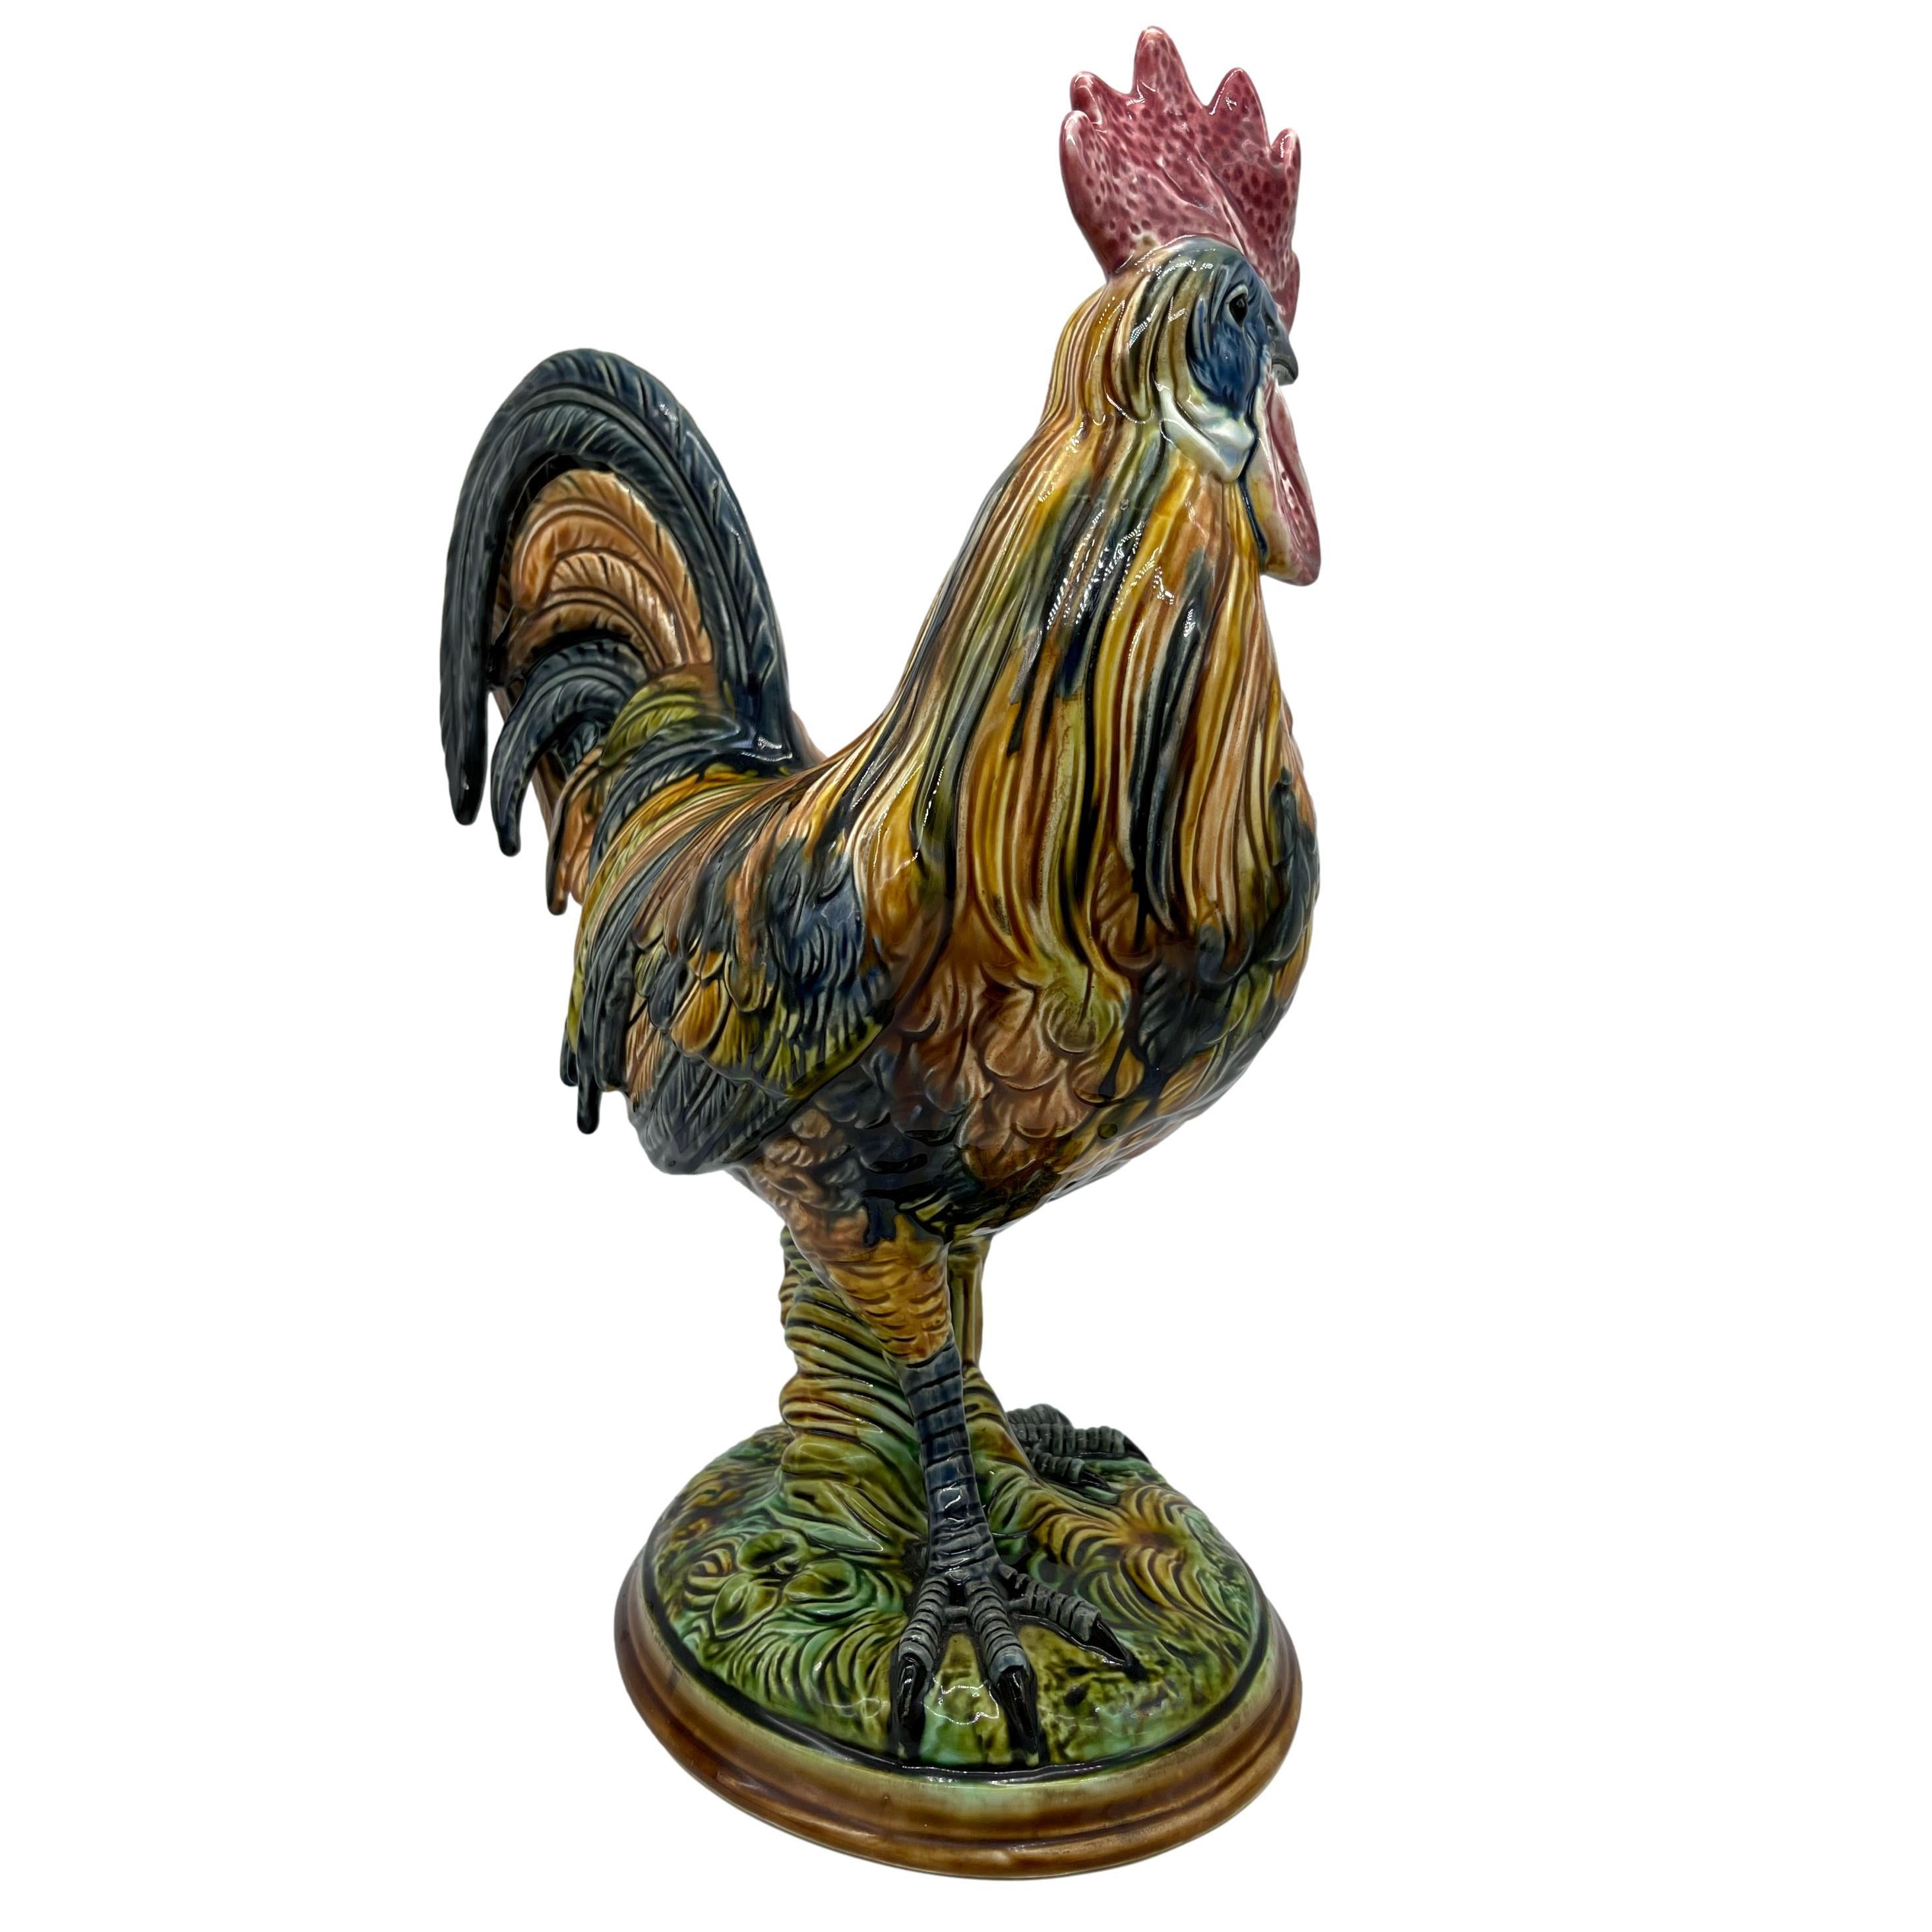 German Majolica Figural Rooster by Riedel Von Riedelstein, Dallwitz, ca. 1885 In Good Condition For Sale In Banner Elk, NC